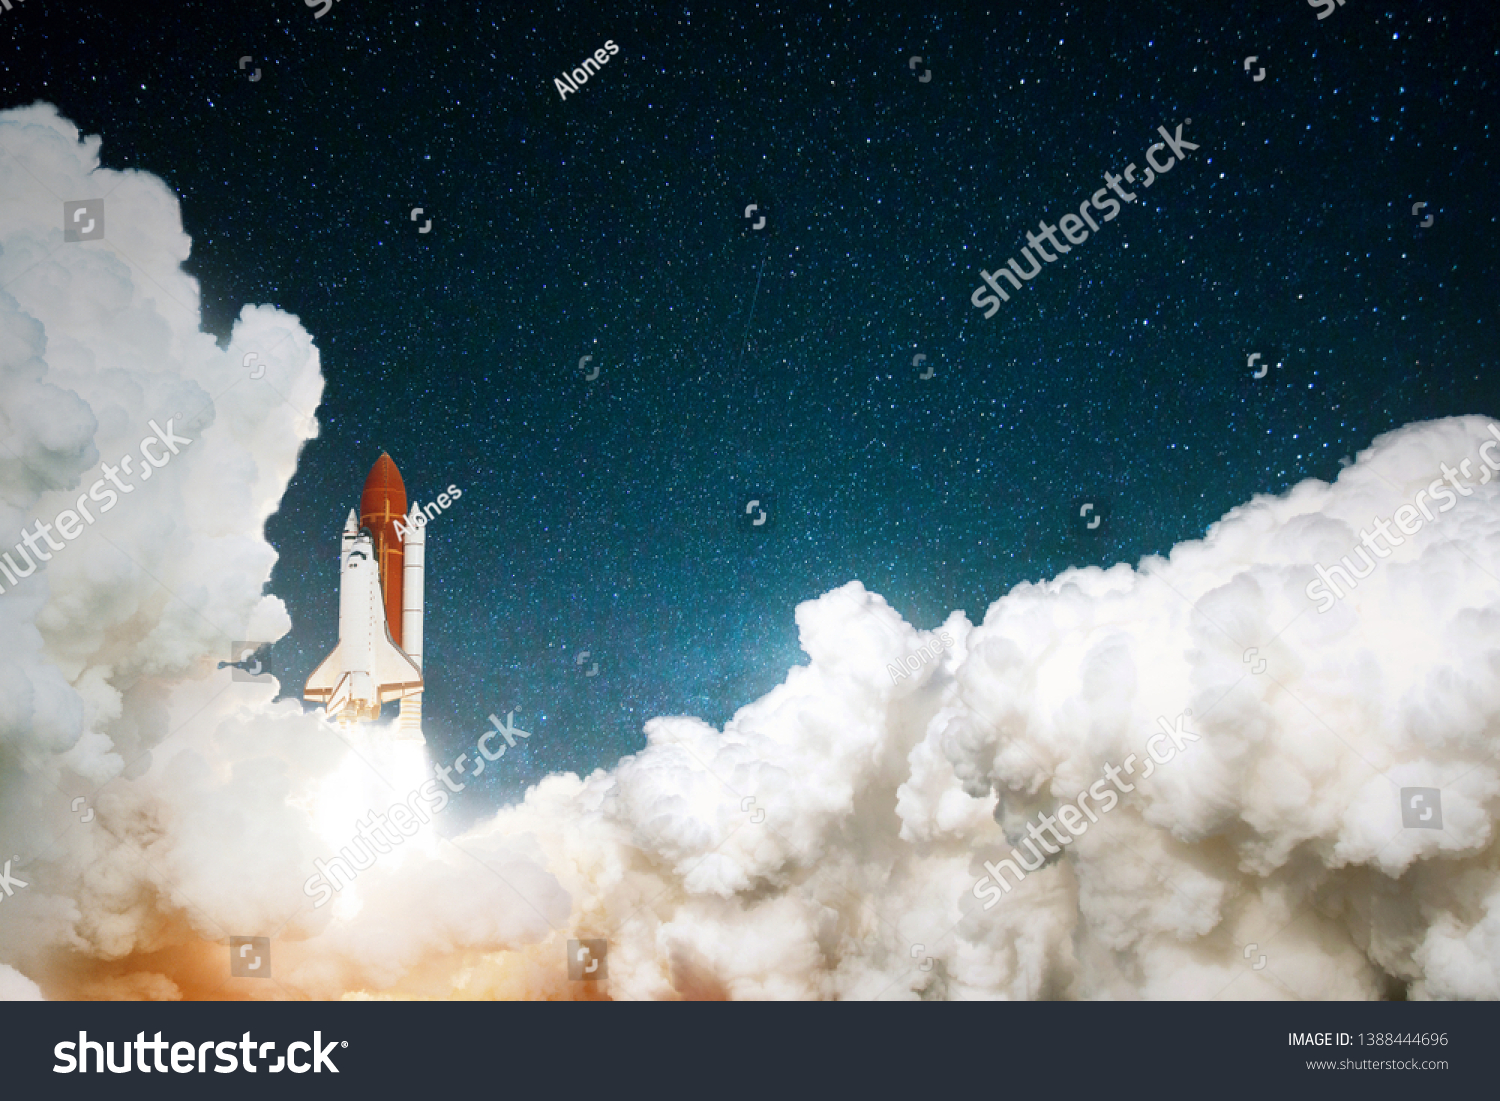 Rocket takes off in the starry sky. Spaceship begins the mission. Travel to mars concept. Space shuttle taking off on a mission.  #1388444696